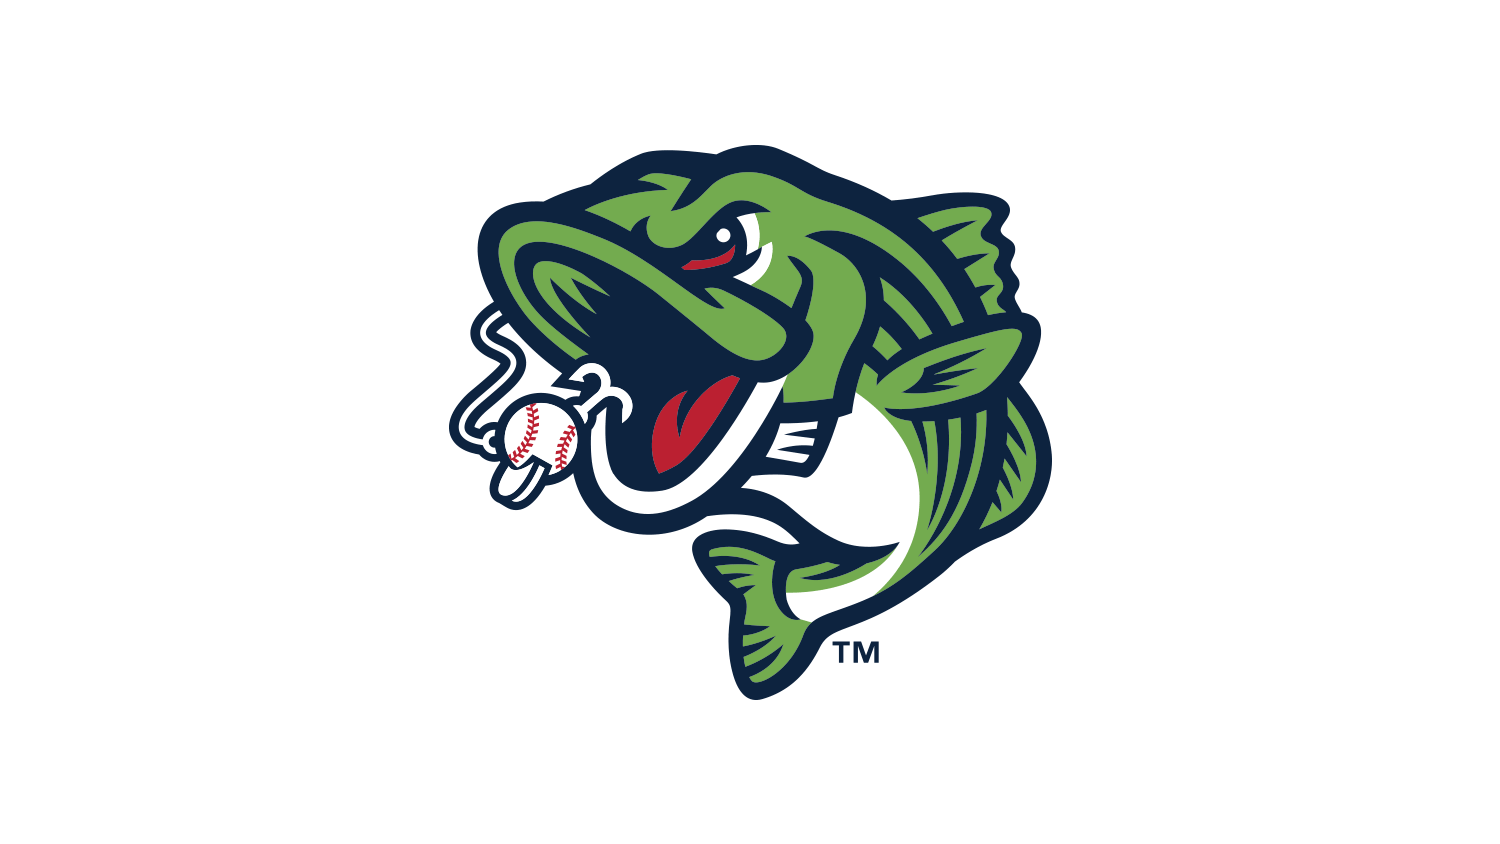 The Gwinnett Stripers take a data-driven approach to putting fans first ...